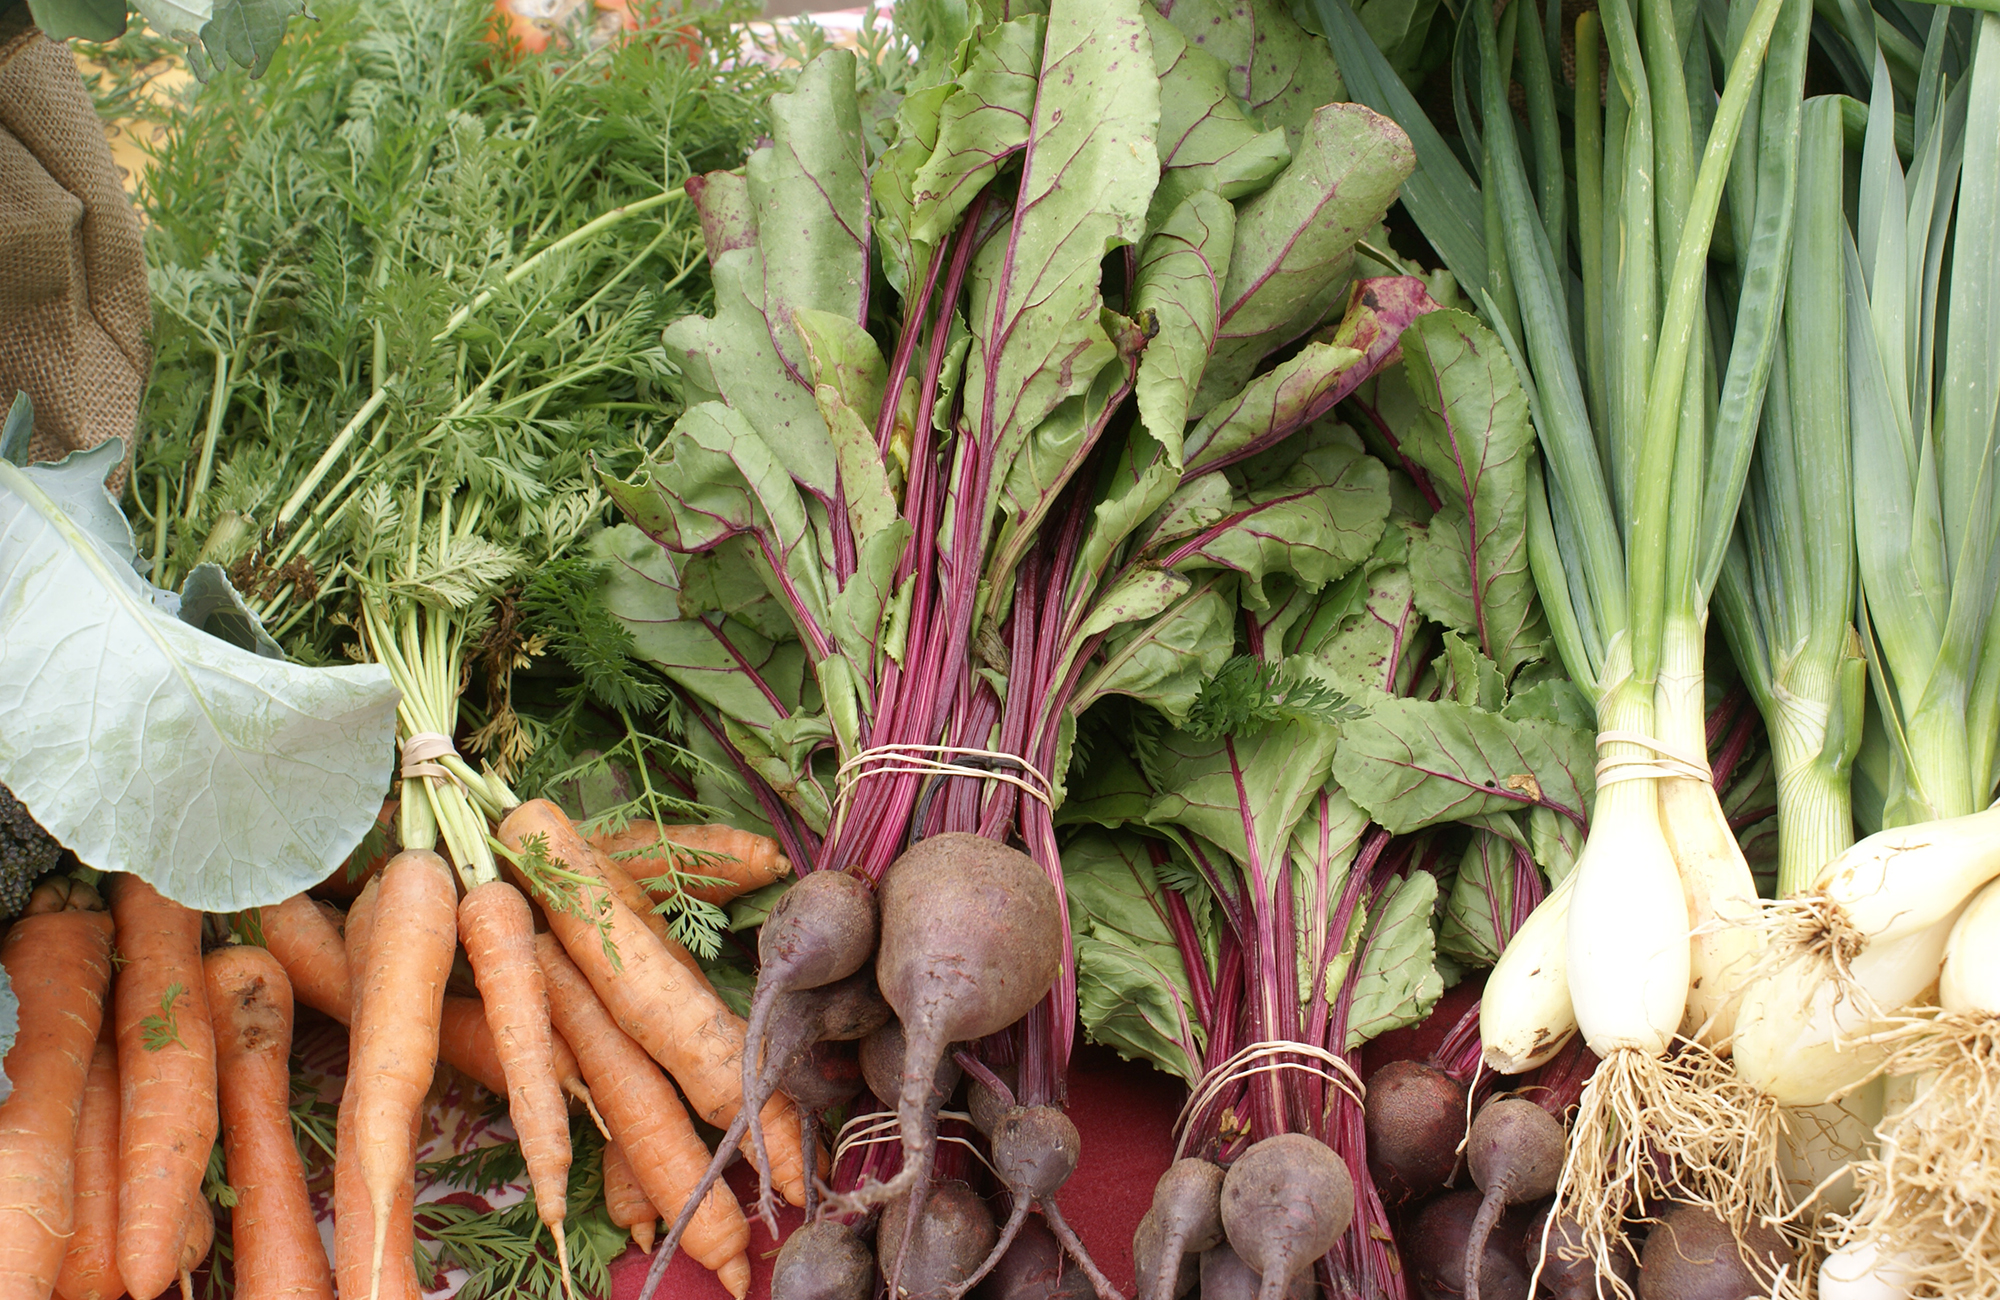 Picture of fresh carrots, beets, and leeks